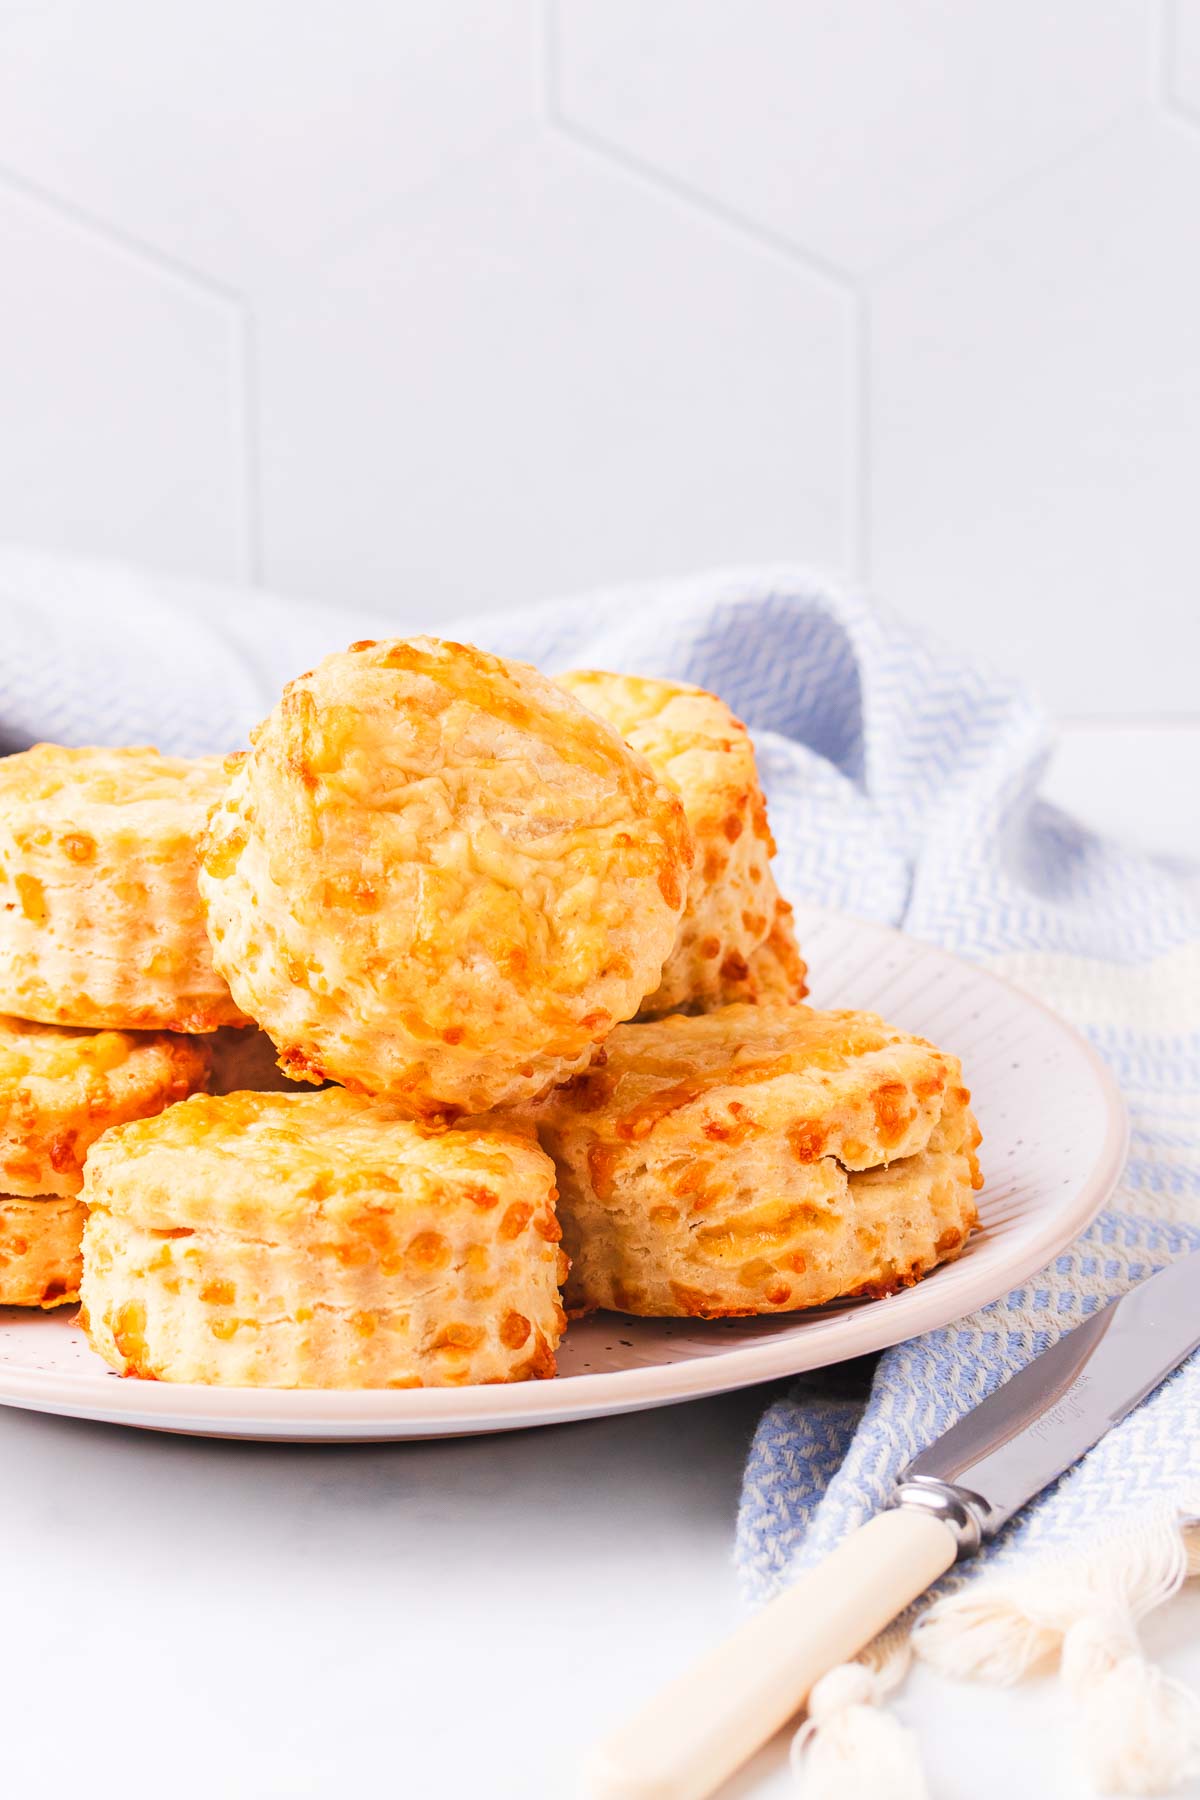 Gluten free cheese scones piled onto a large plate, with a pale blue tea towel and a bone handled knife.